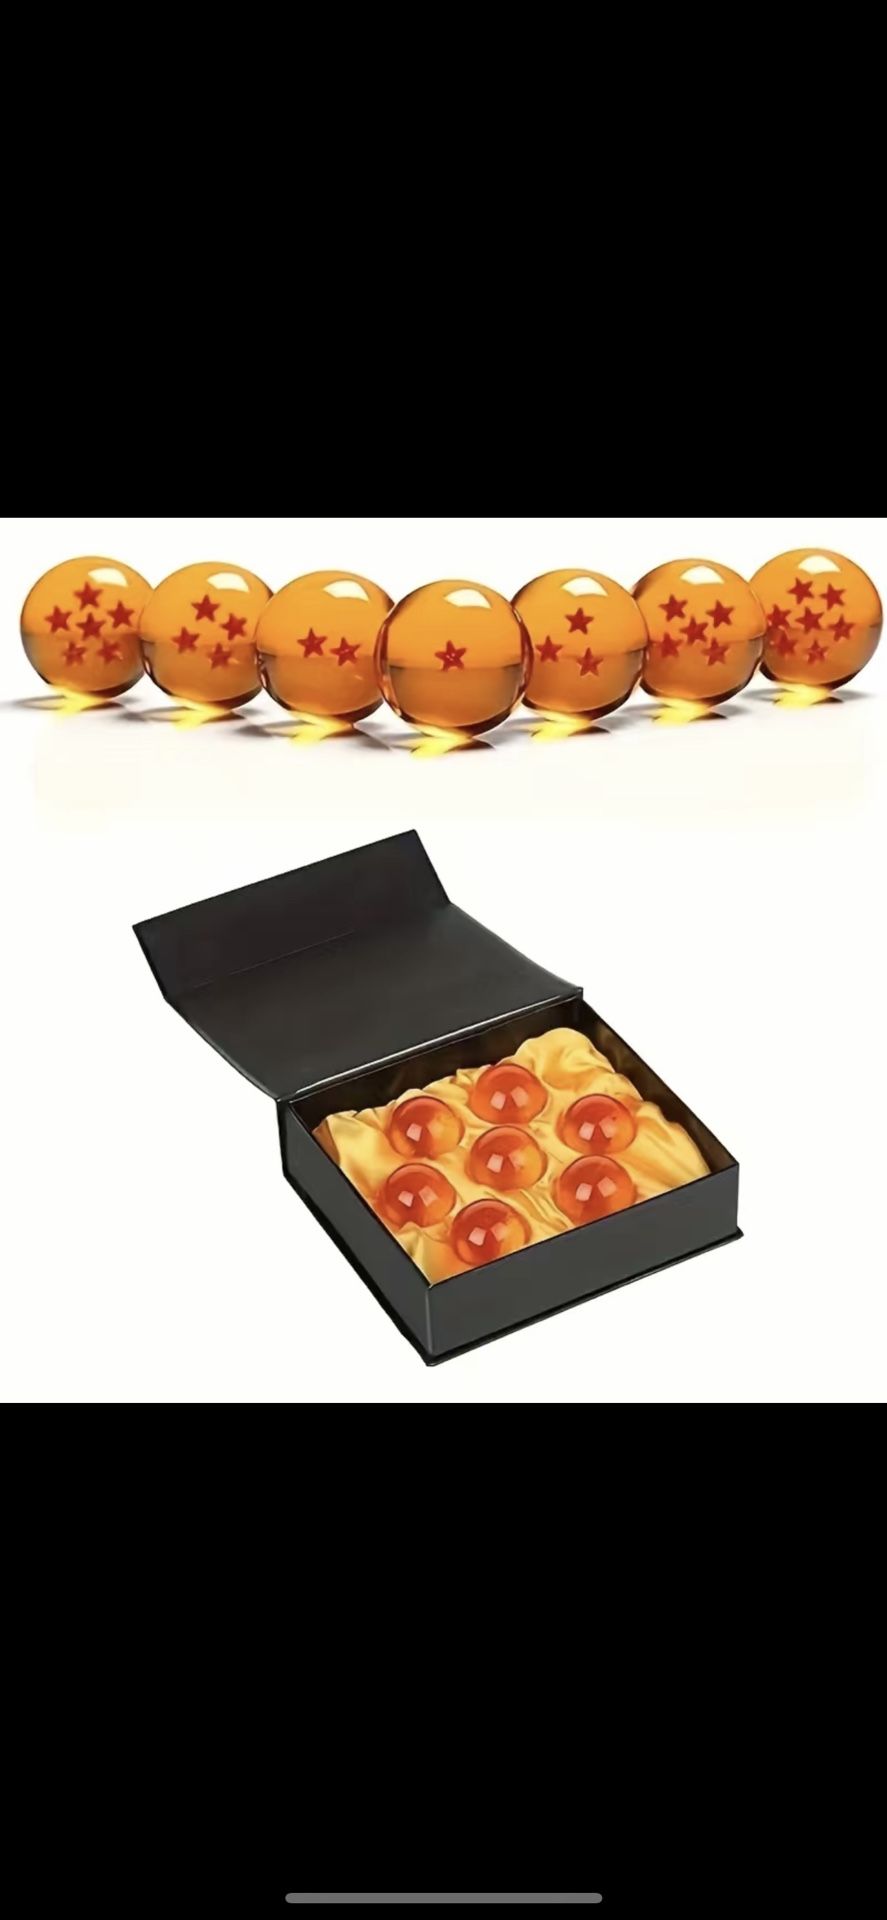 New Collectible Medium Crystal Glass 7 Stars Balls - 7 Pcs with Gift Box (43 MM in Diameter)